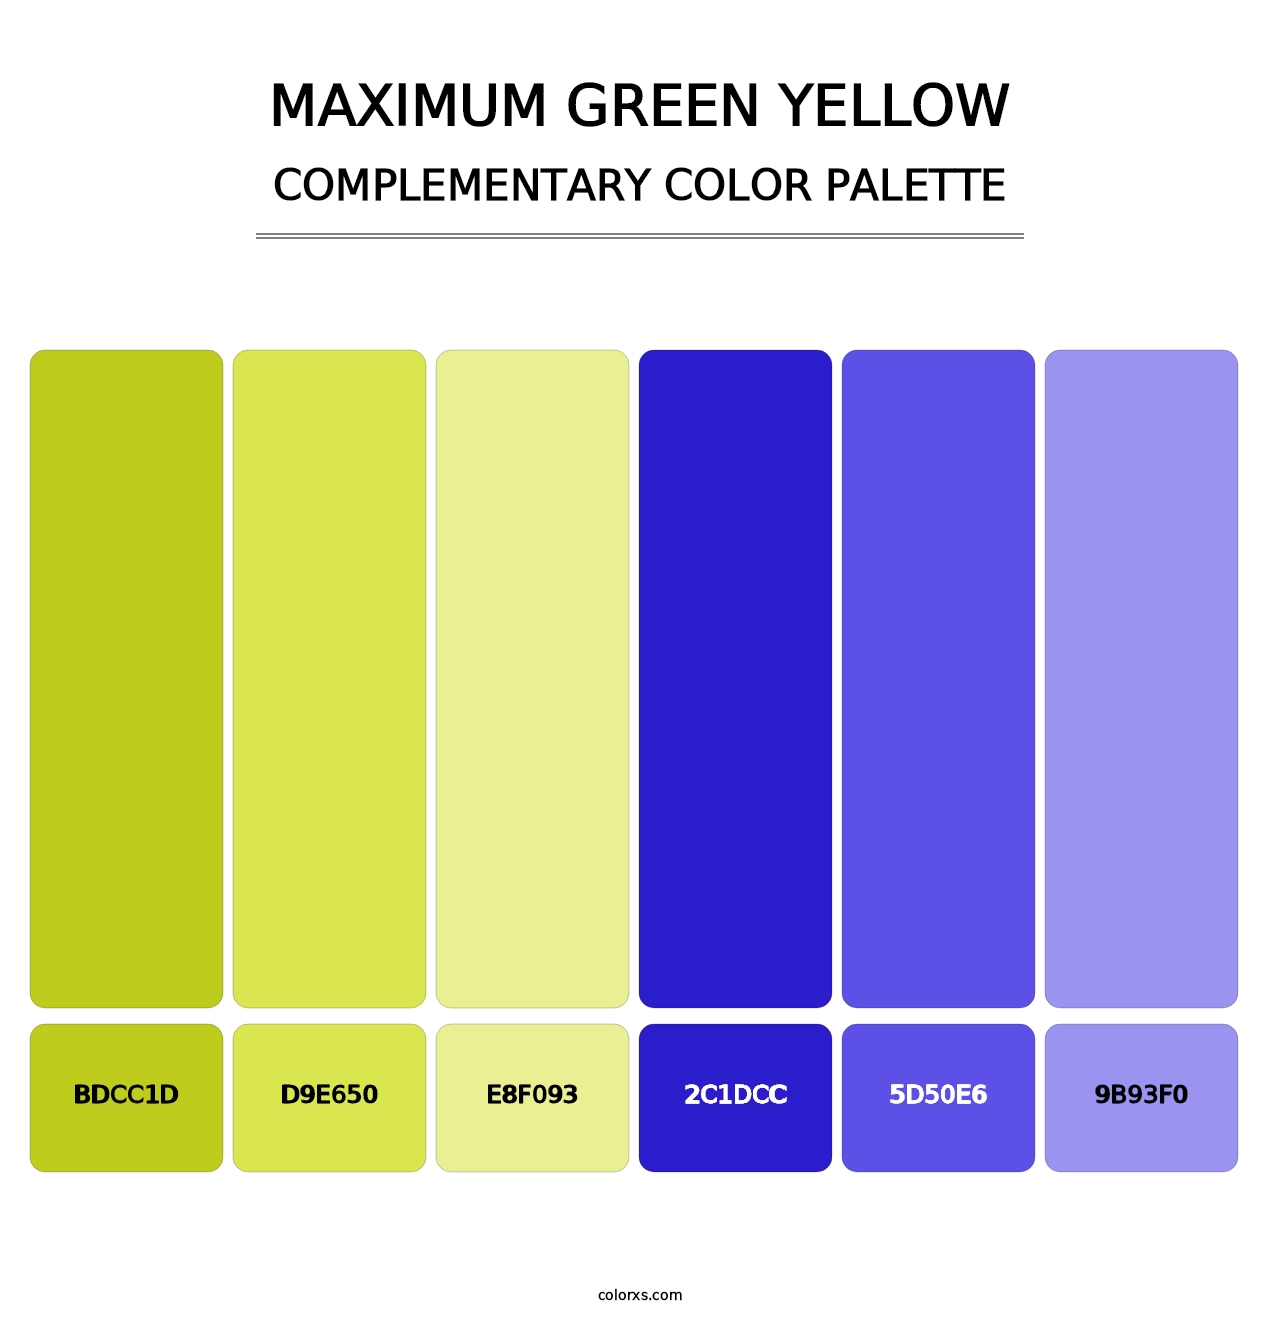 Maximum Green Yellow - Complementary Color Palette